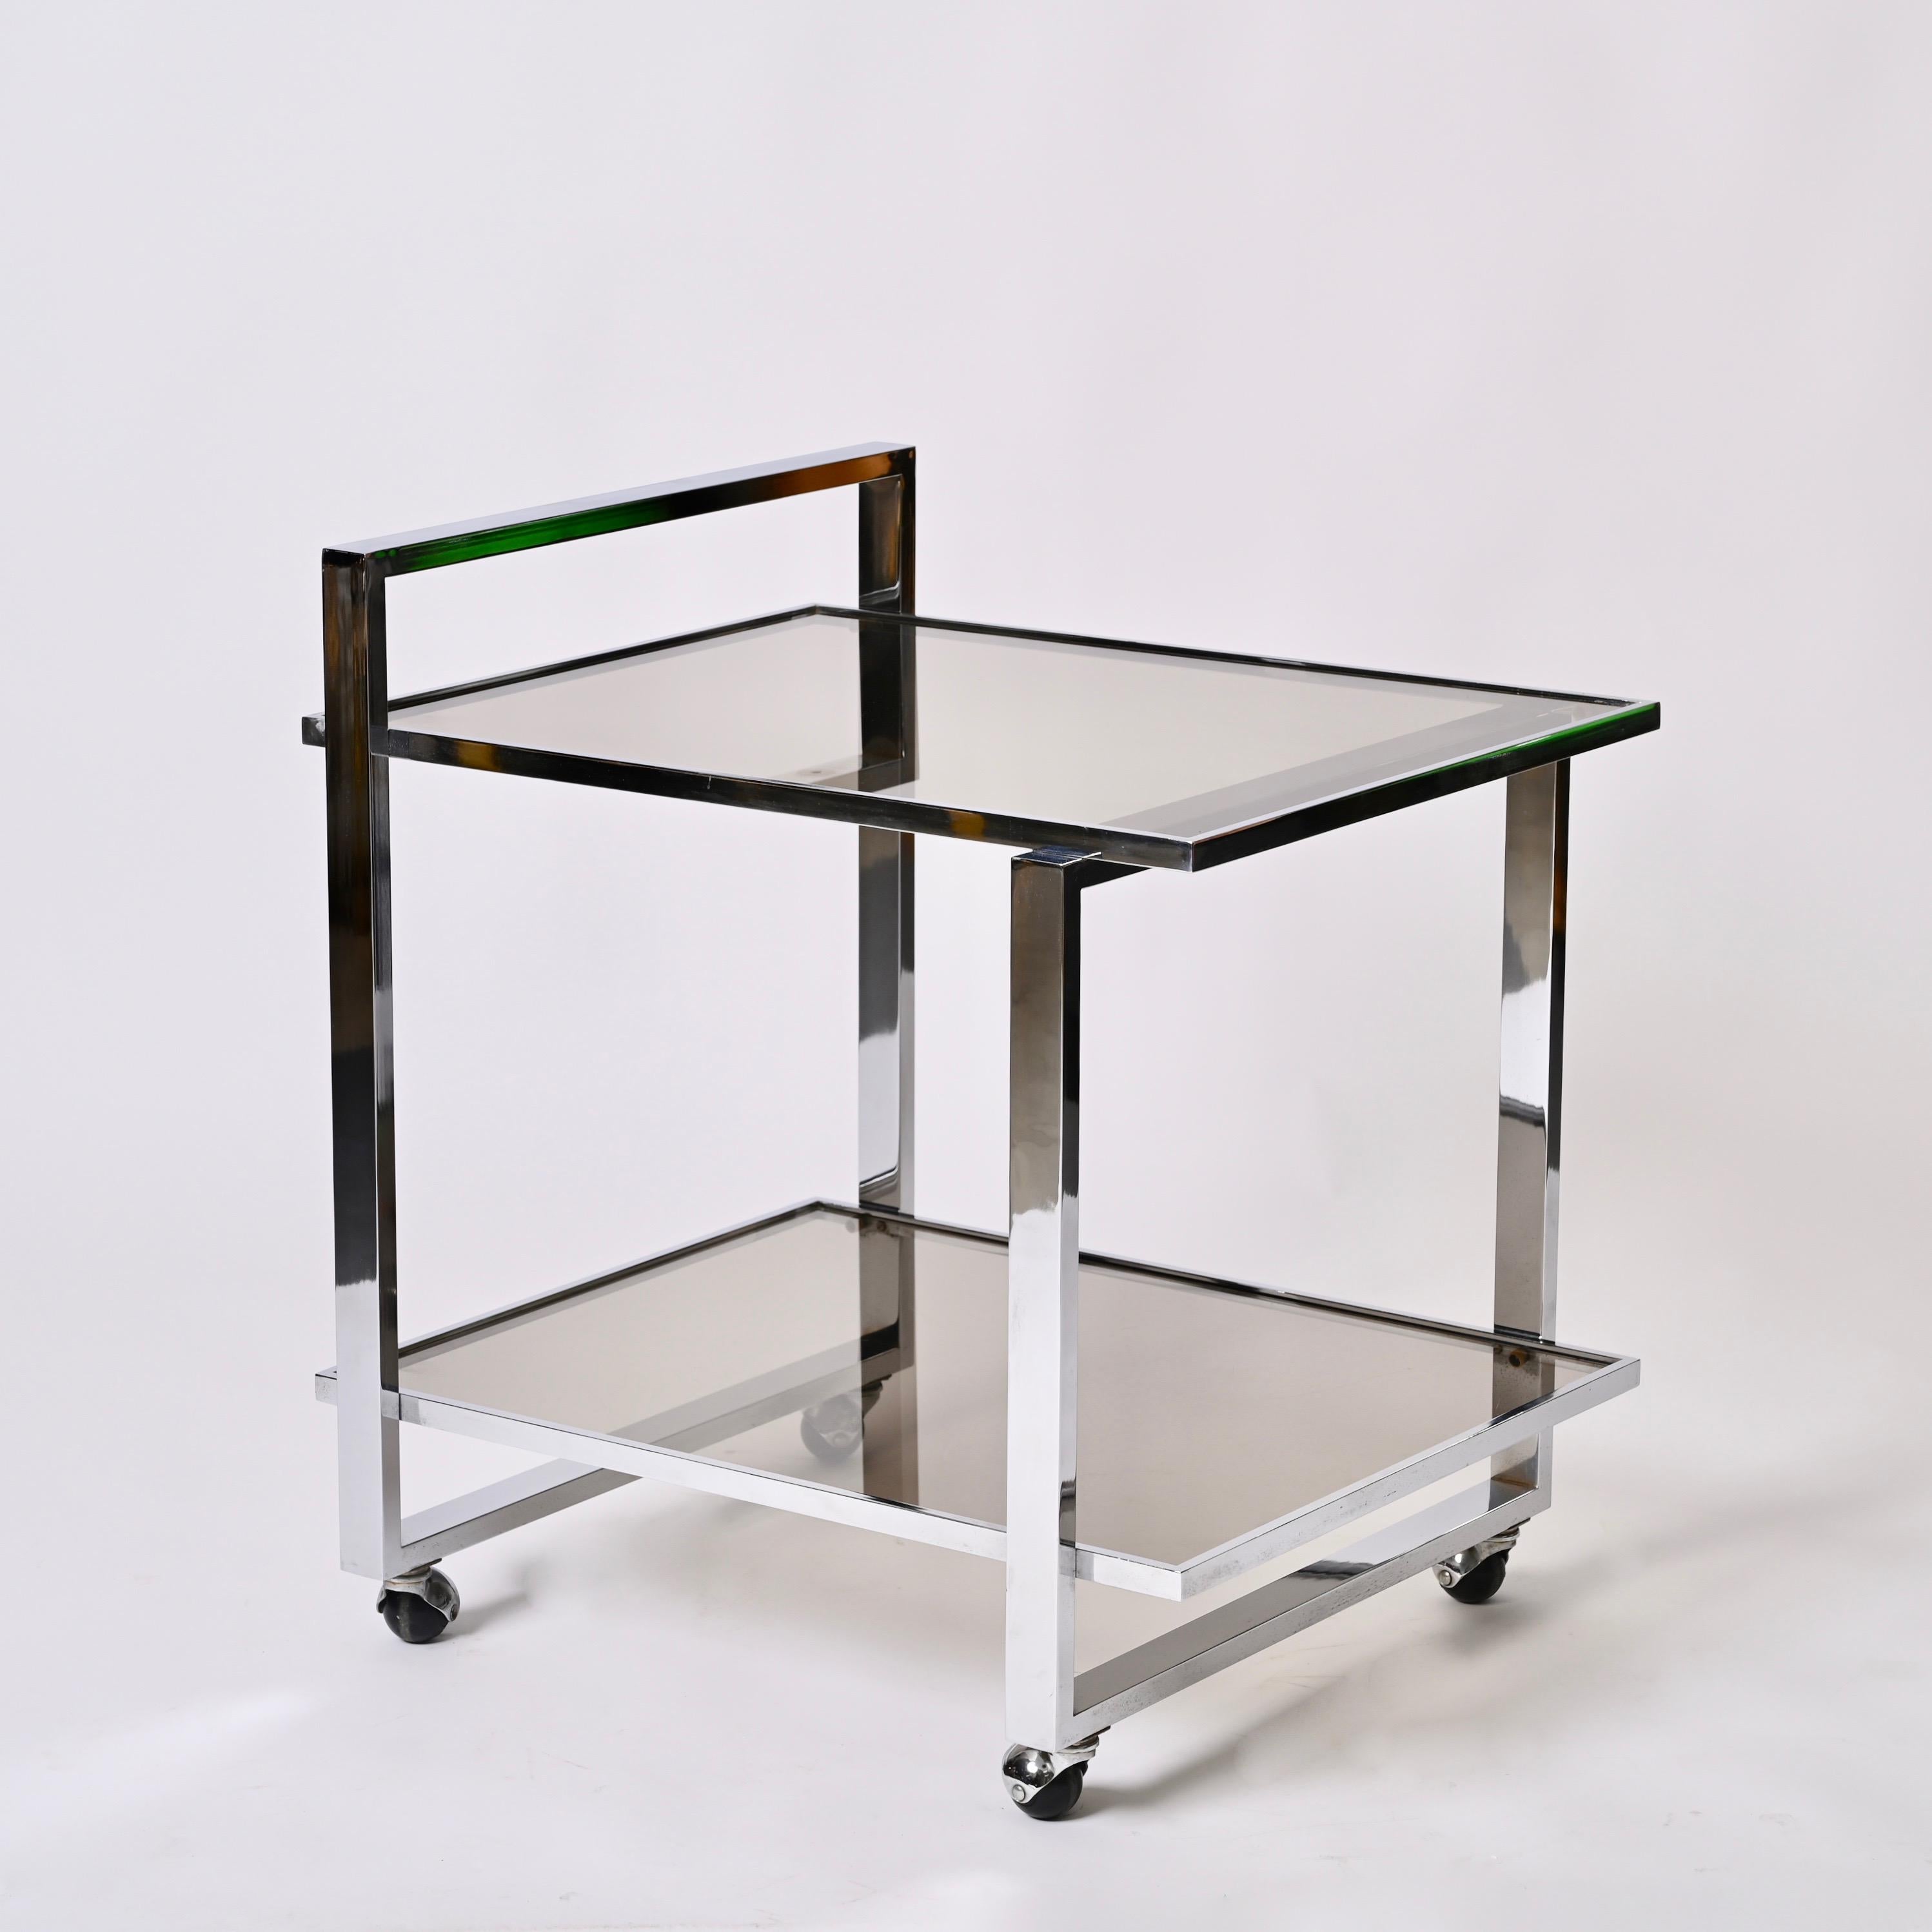 Beautiful midcentury bar cart in chromed steel and smoked crystal glass. This wonderful article was designed in Italy during the 1970s.

This piece is gorgeous as it has a shiny chrome frame structure with deep crystal glass trays. The two shelves